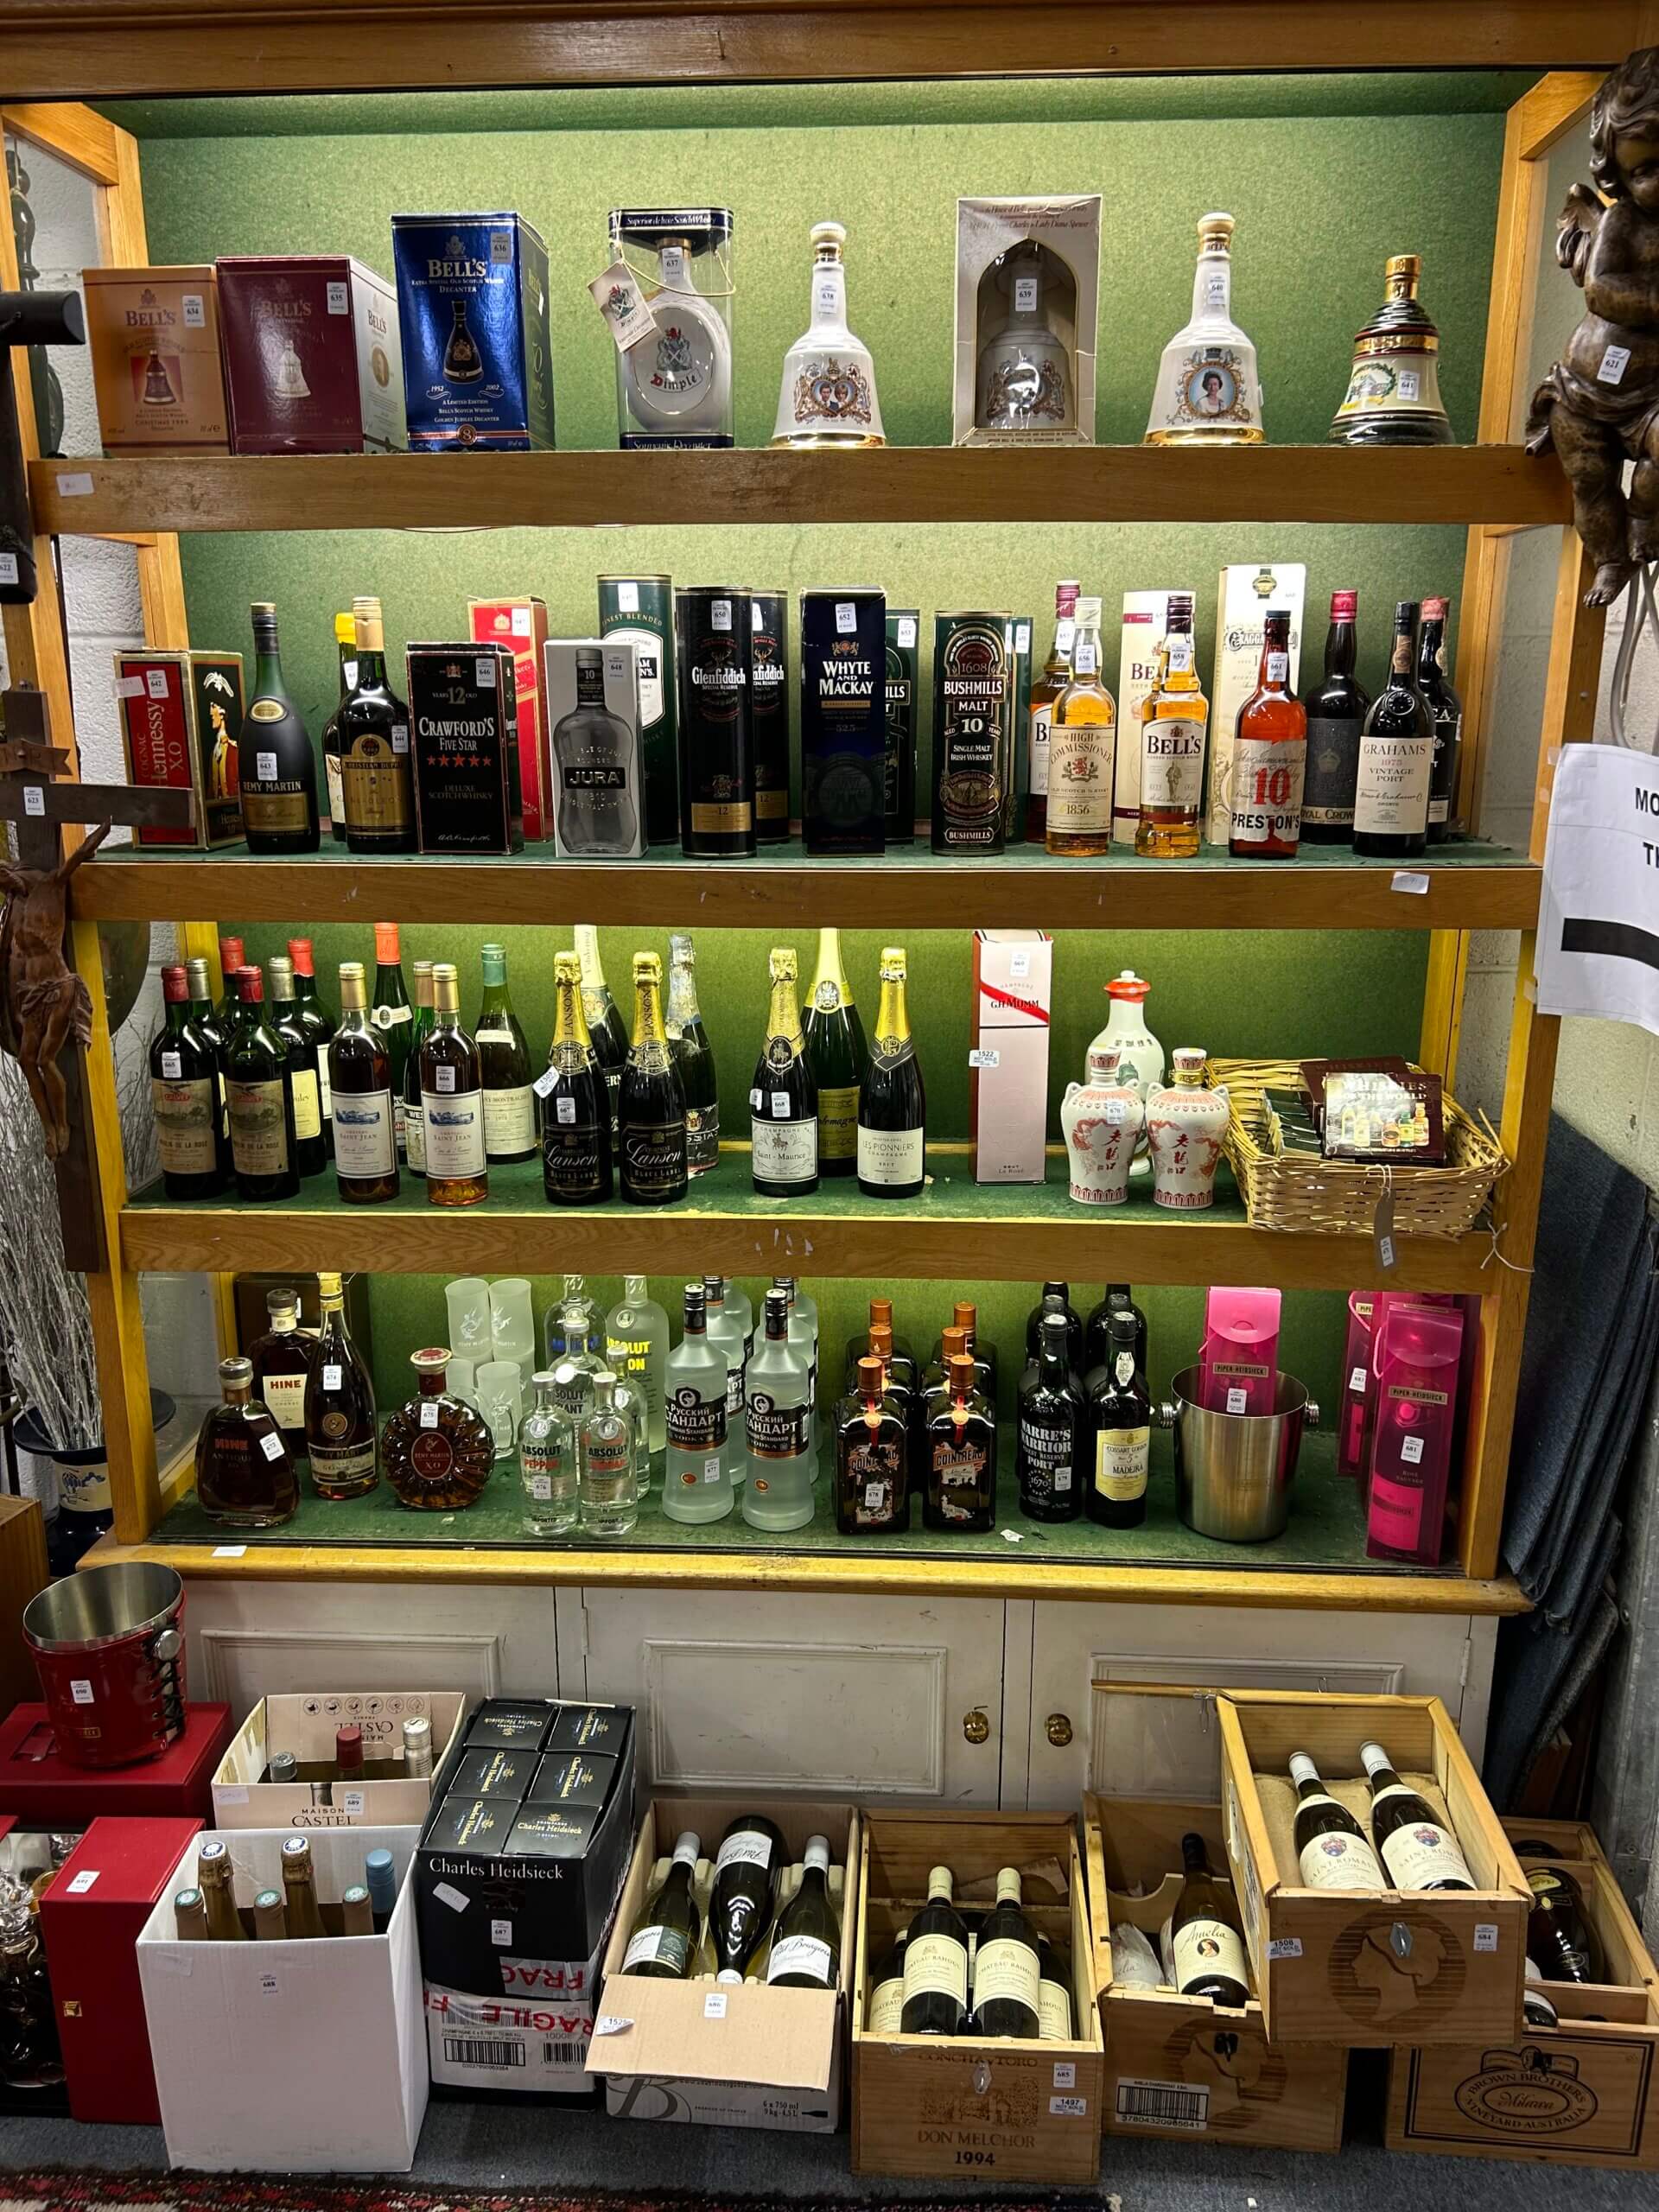 A selection of wines and spirits